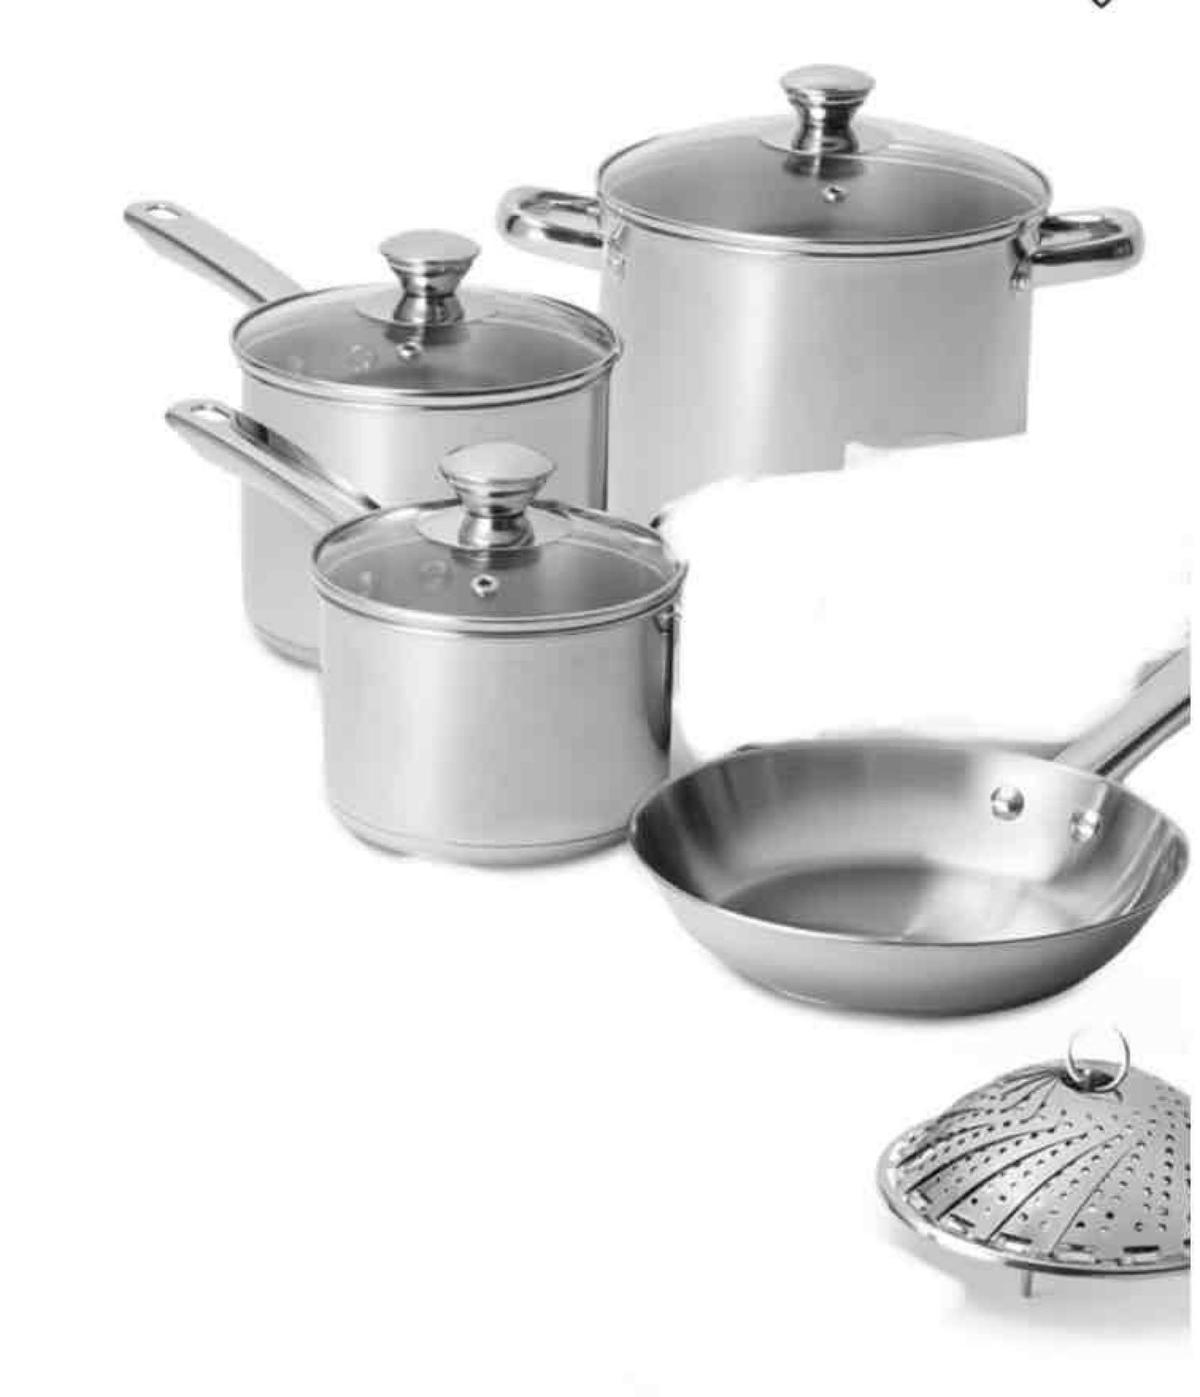 5 Pieces Kitchens ToolsCookware Set